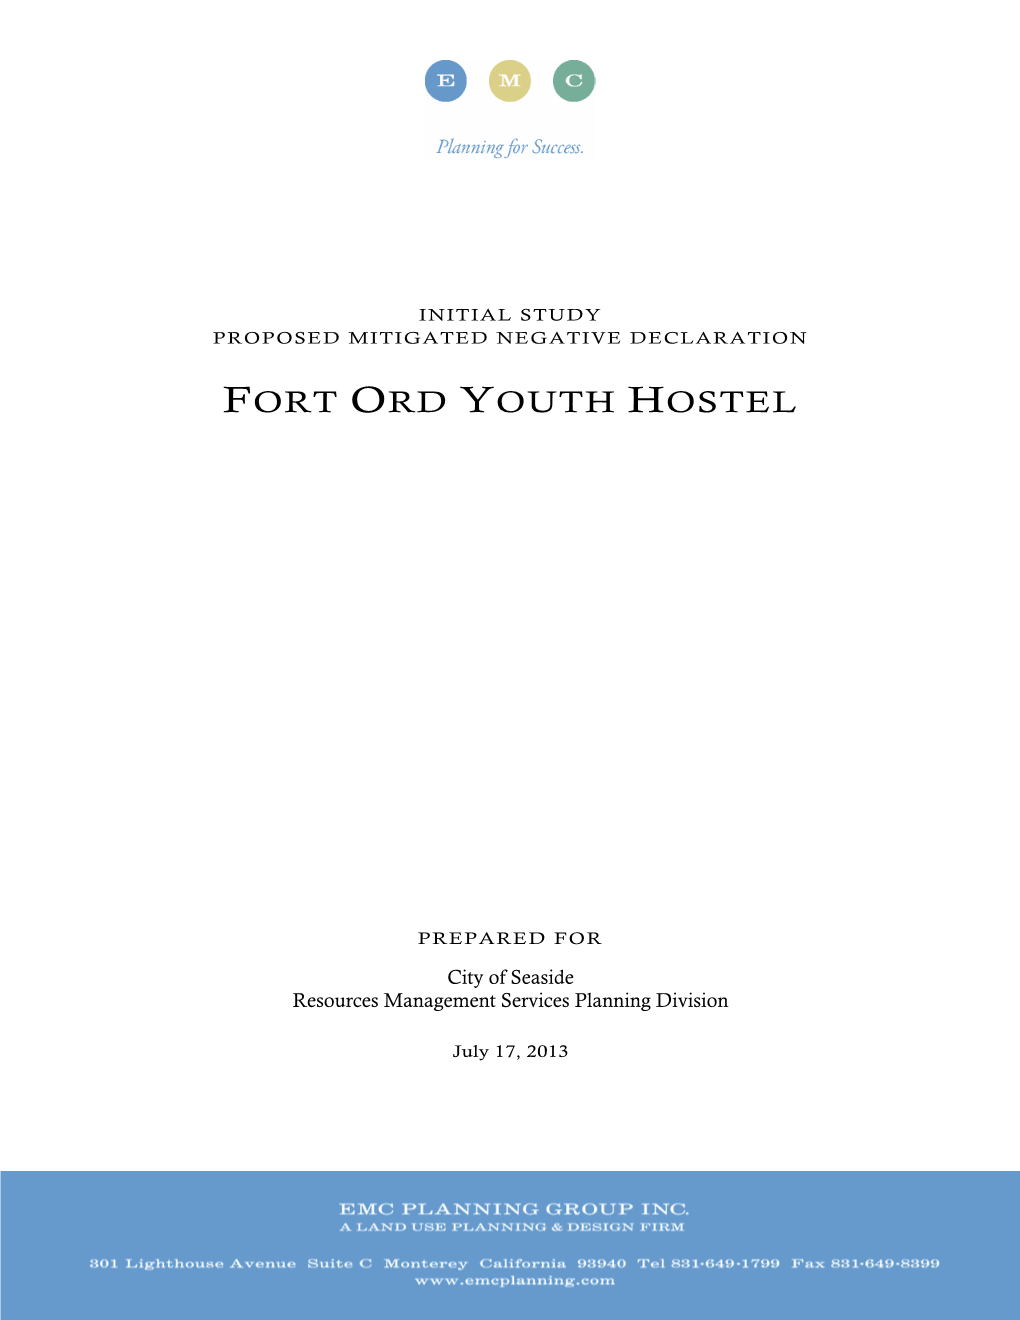 Fort Ord Youth Hostel